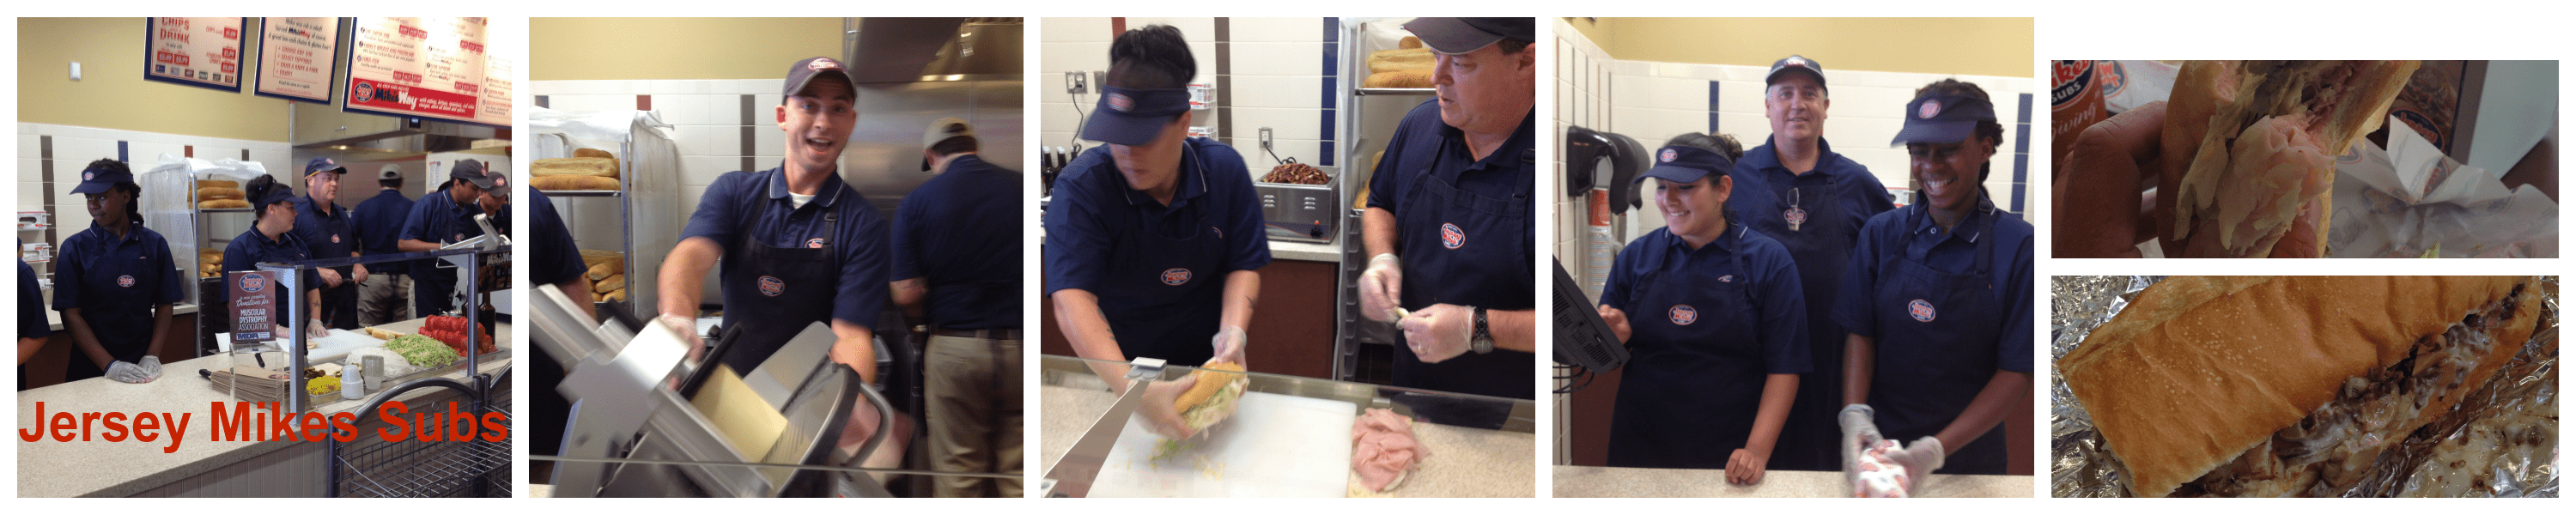 jersey mikes net chef